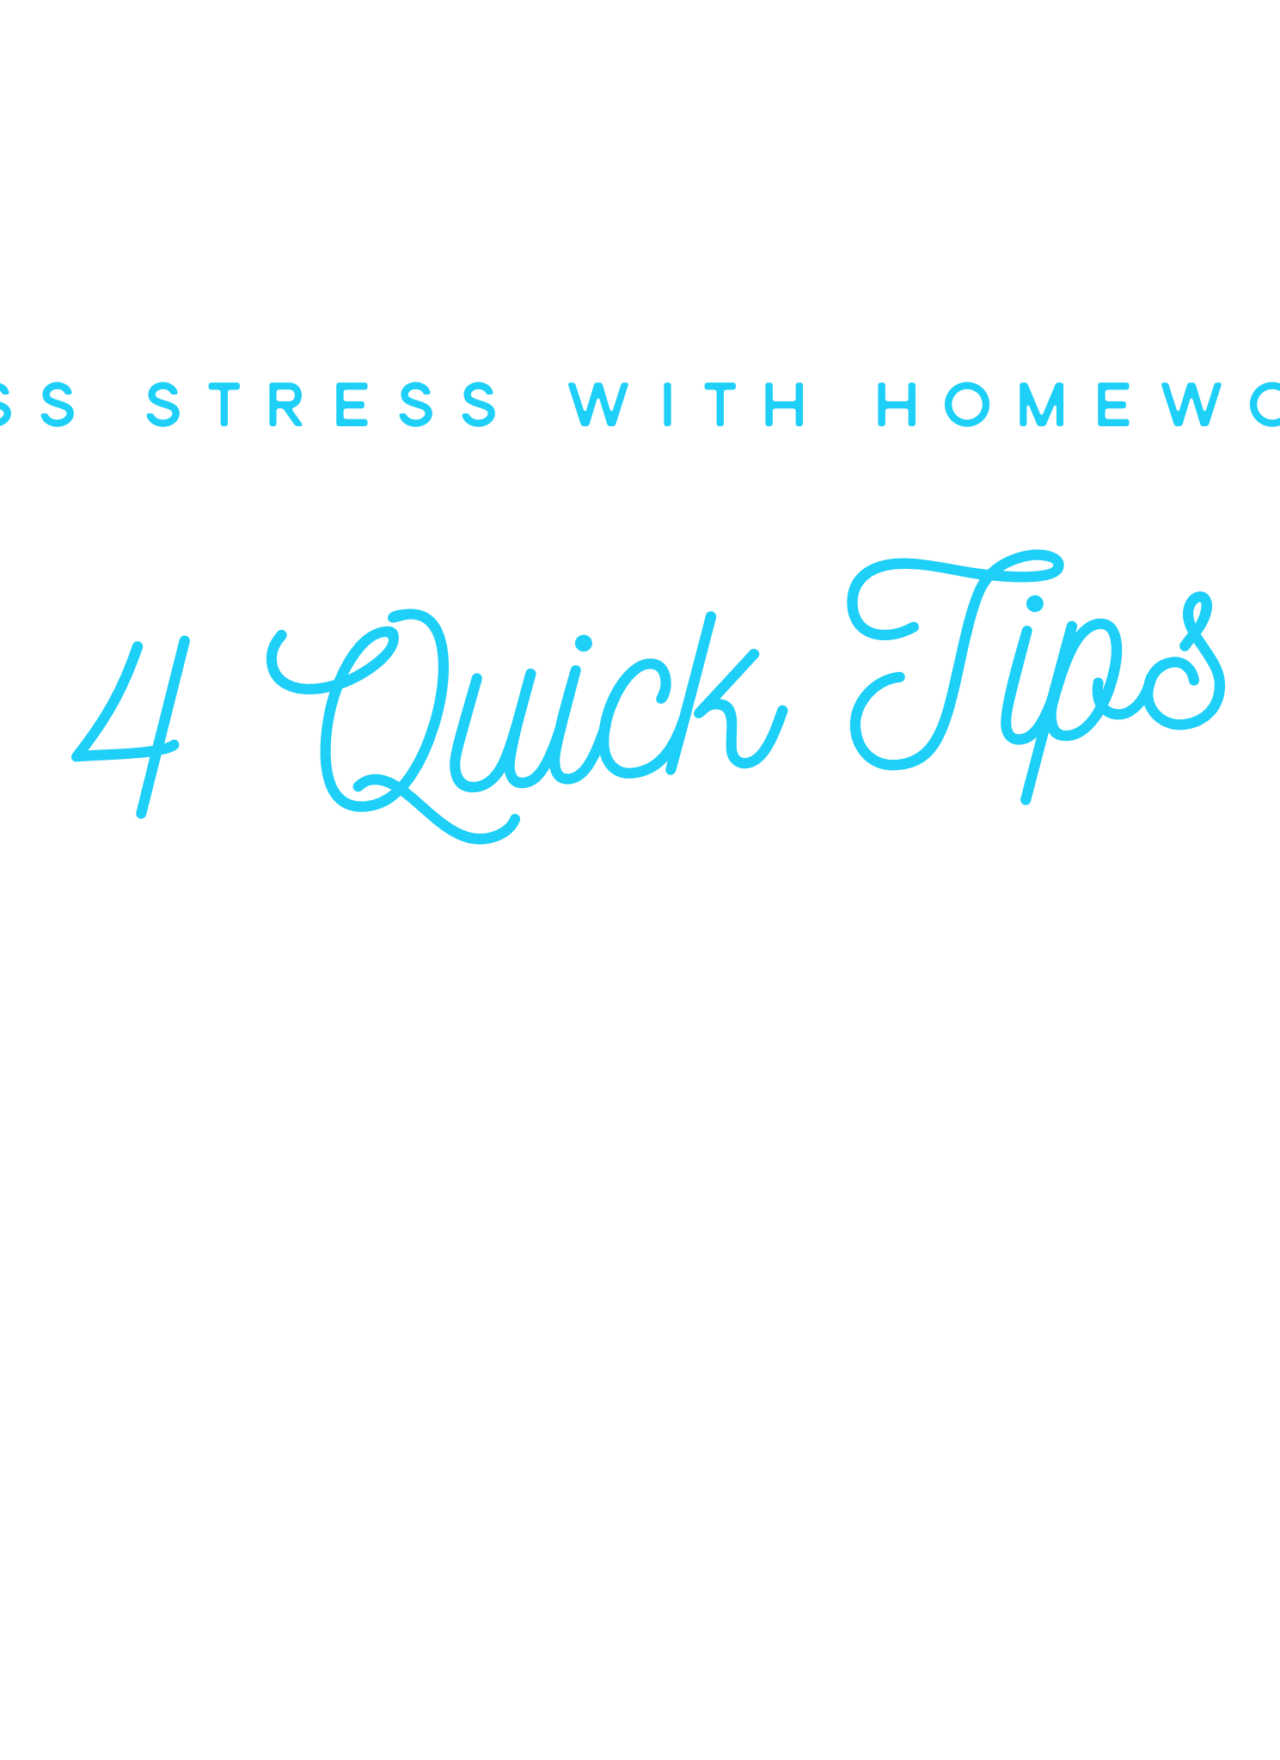 Less Stress with Homework 4 Easy Tips